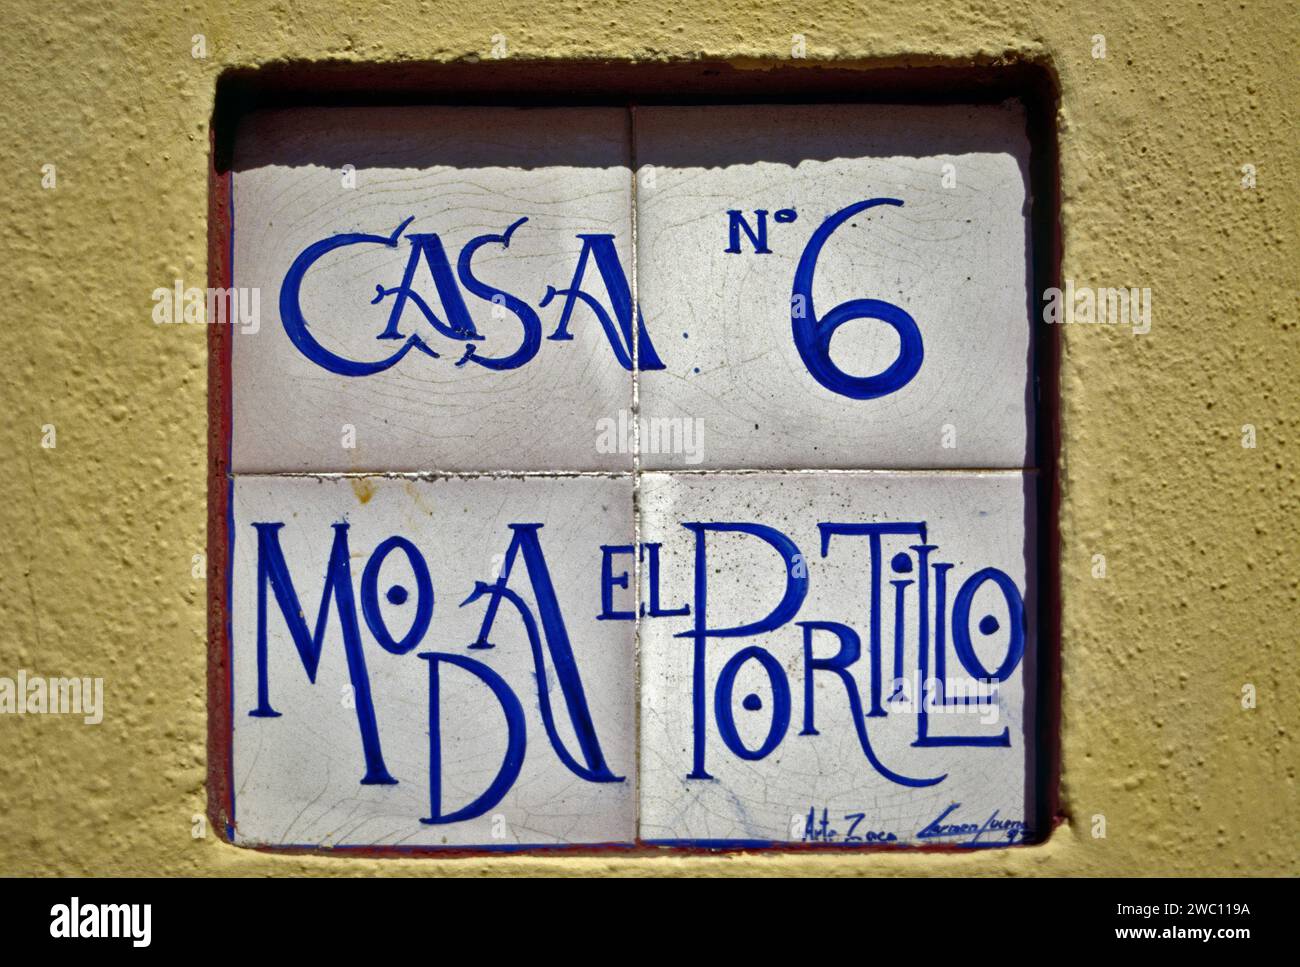 Tile house number sign in Juderia Old Jewish Quarter in Cordoba, Andalusia, Spain Stock Photo